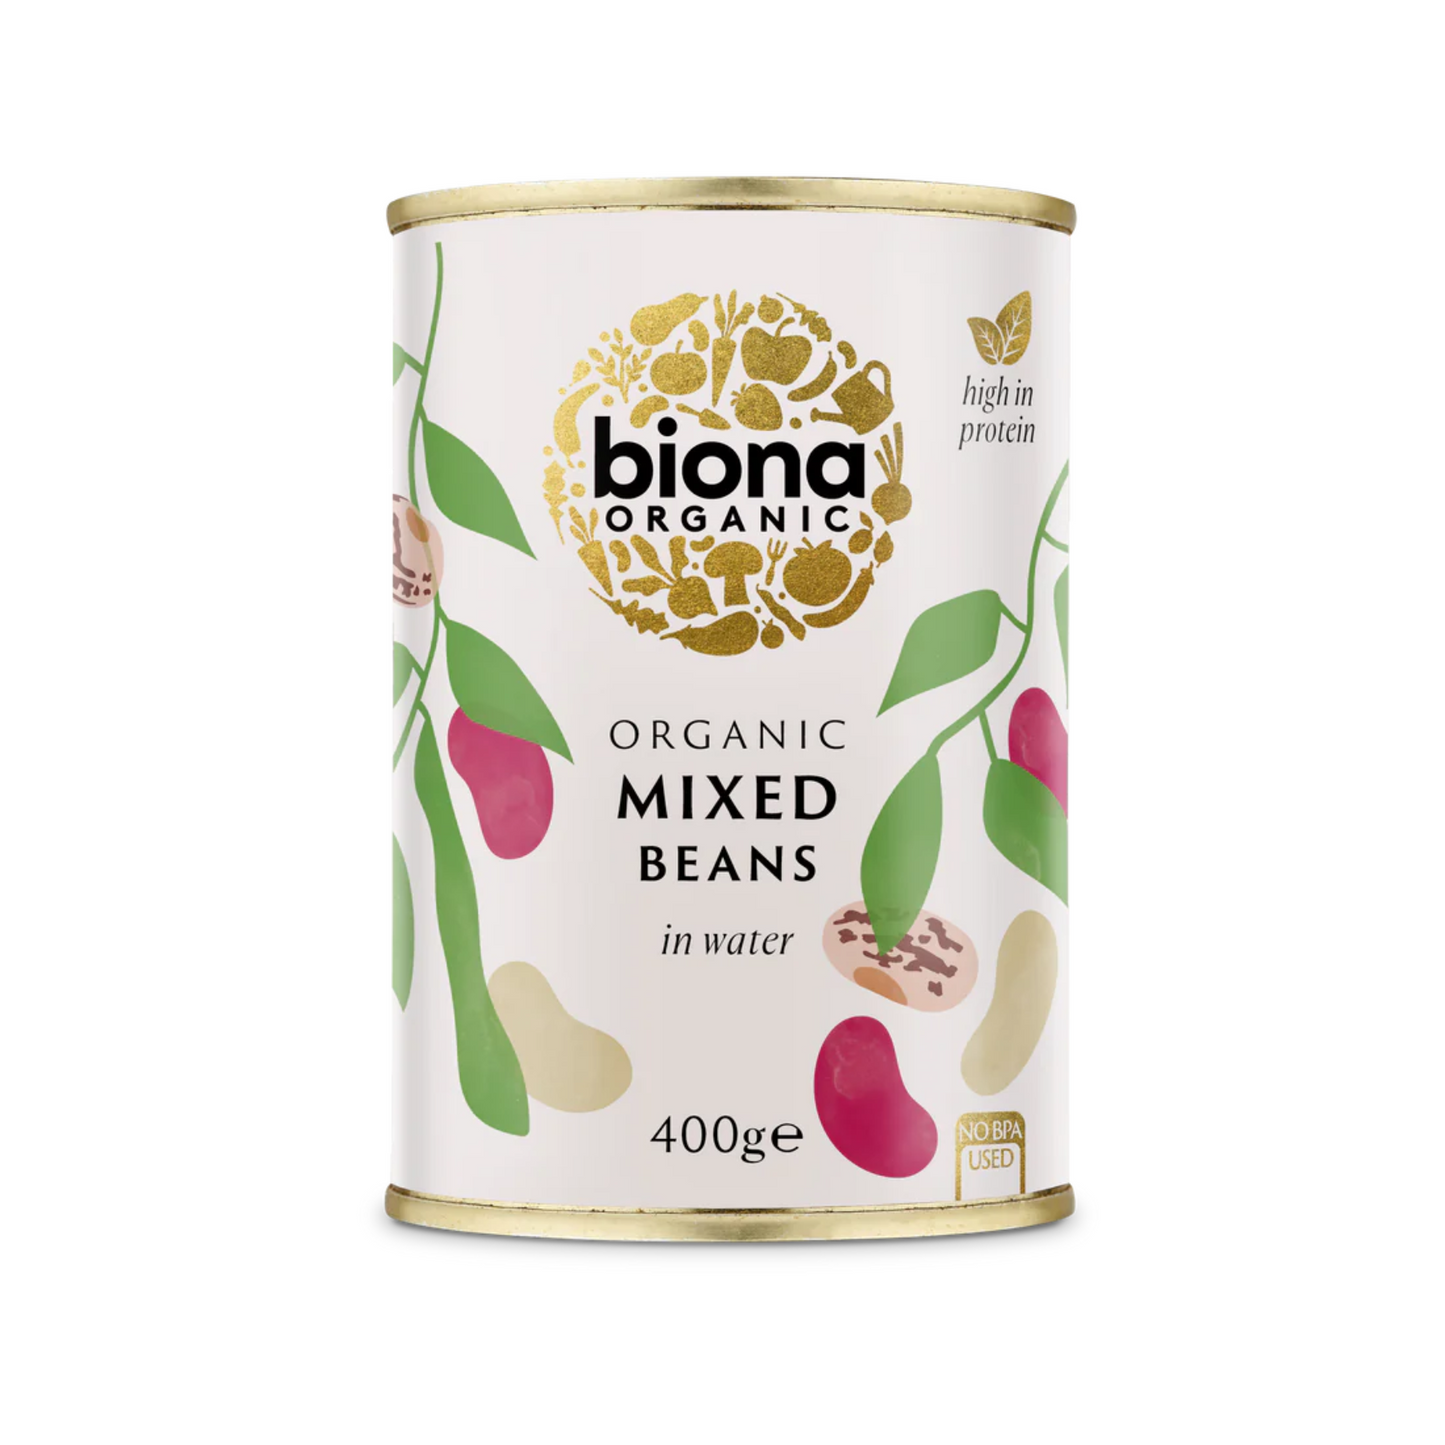 Biona Organic Mixed Beans In Water 400g